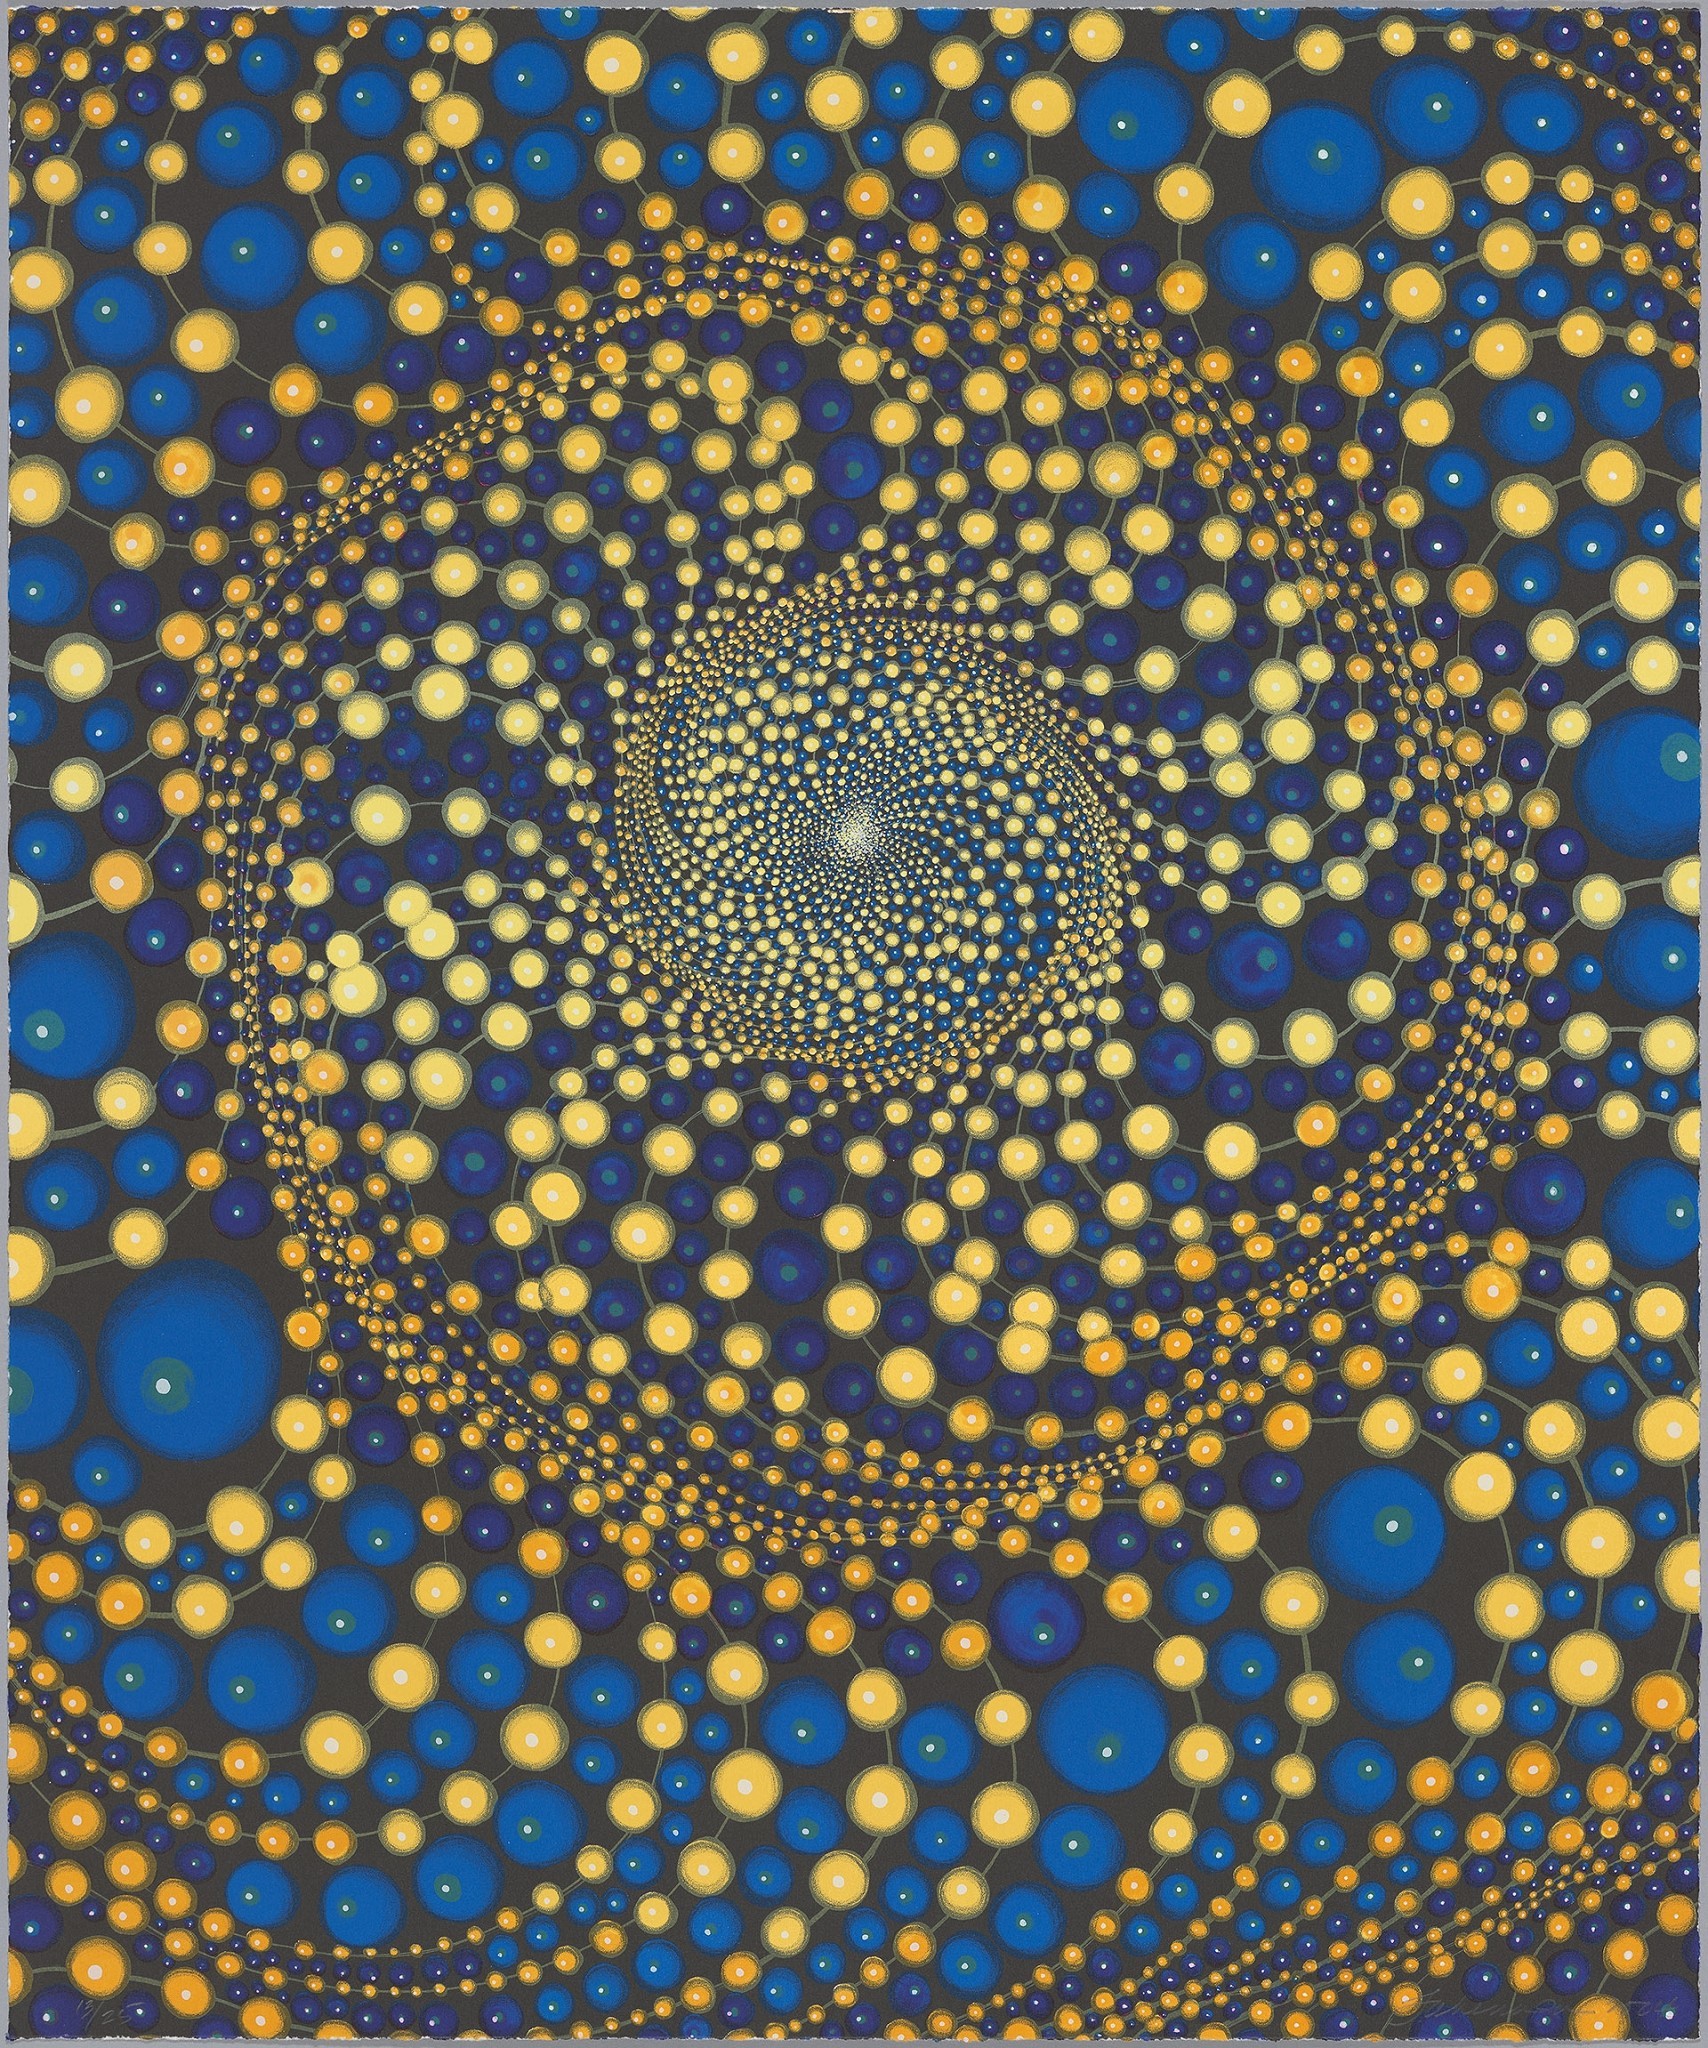 Alternating strands of yellow and blue orbs resembling beads swirl out from a central, circular point above the center of a rectangular painting. The orbs emanate out from the center, starting densely clustered and spreading out and getting bigger toward the painting's edges.